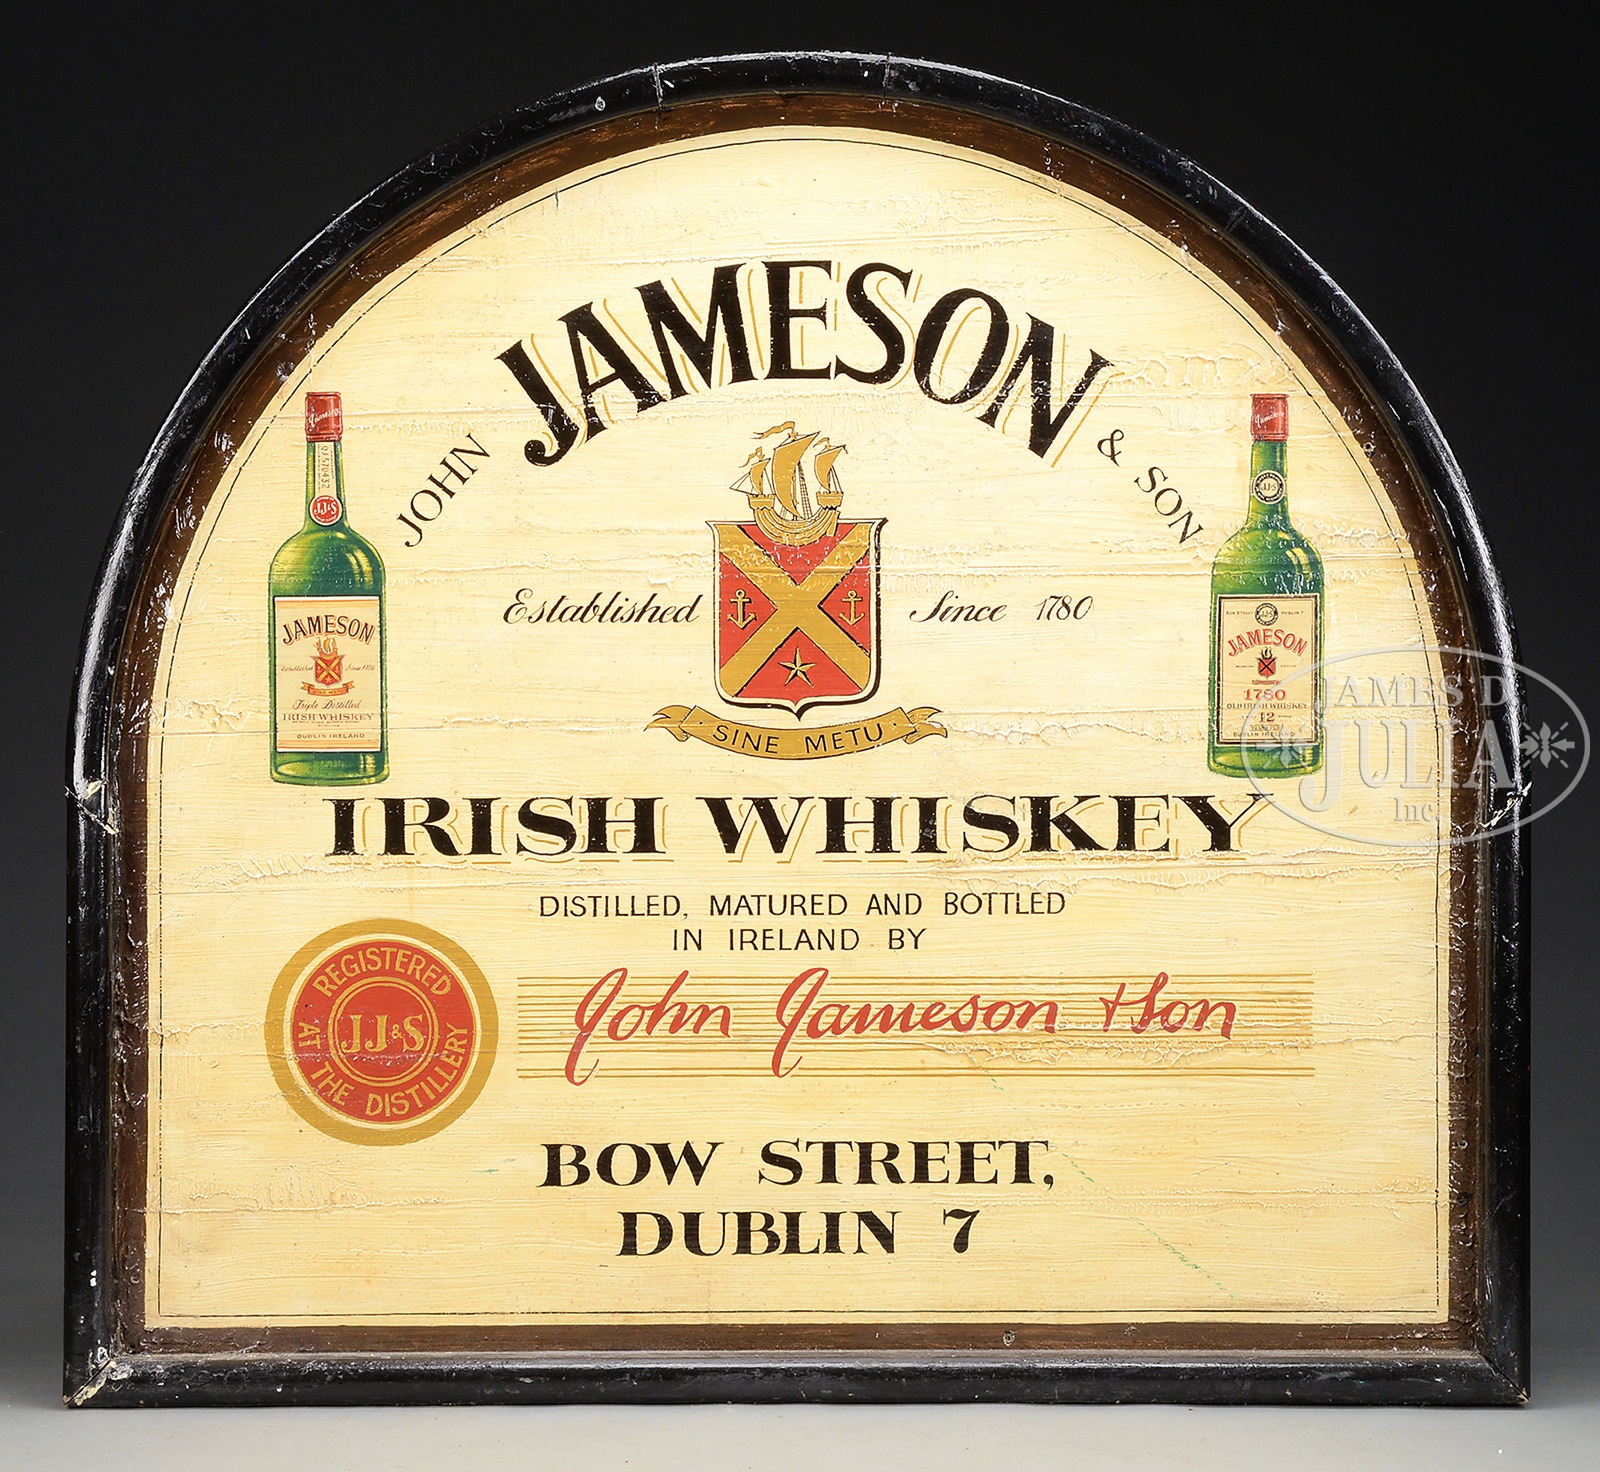 PAINTED WOOD JOHN JAMESON & SON IRISH WHISKEY SIGN. Dome type sign with flat bottom features 2 green